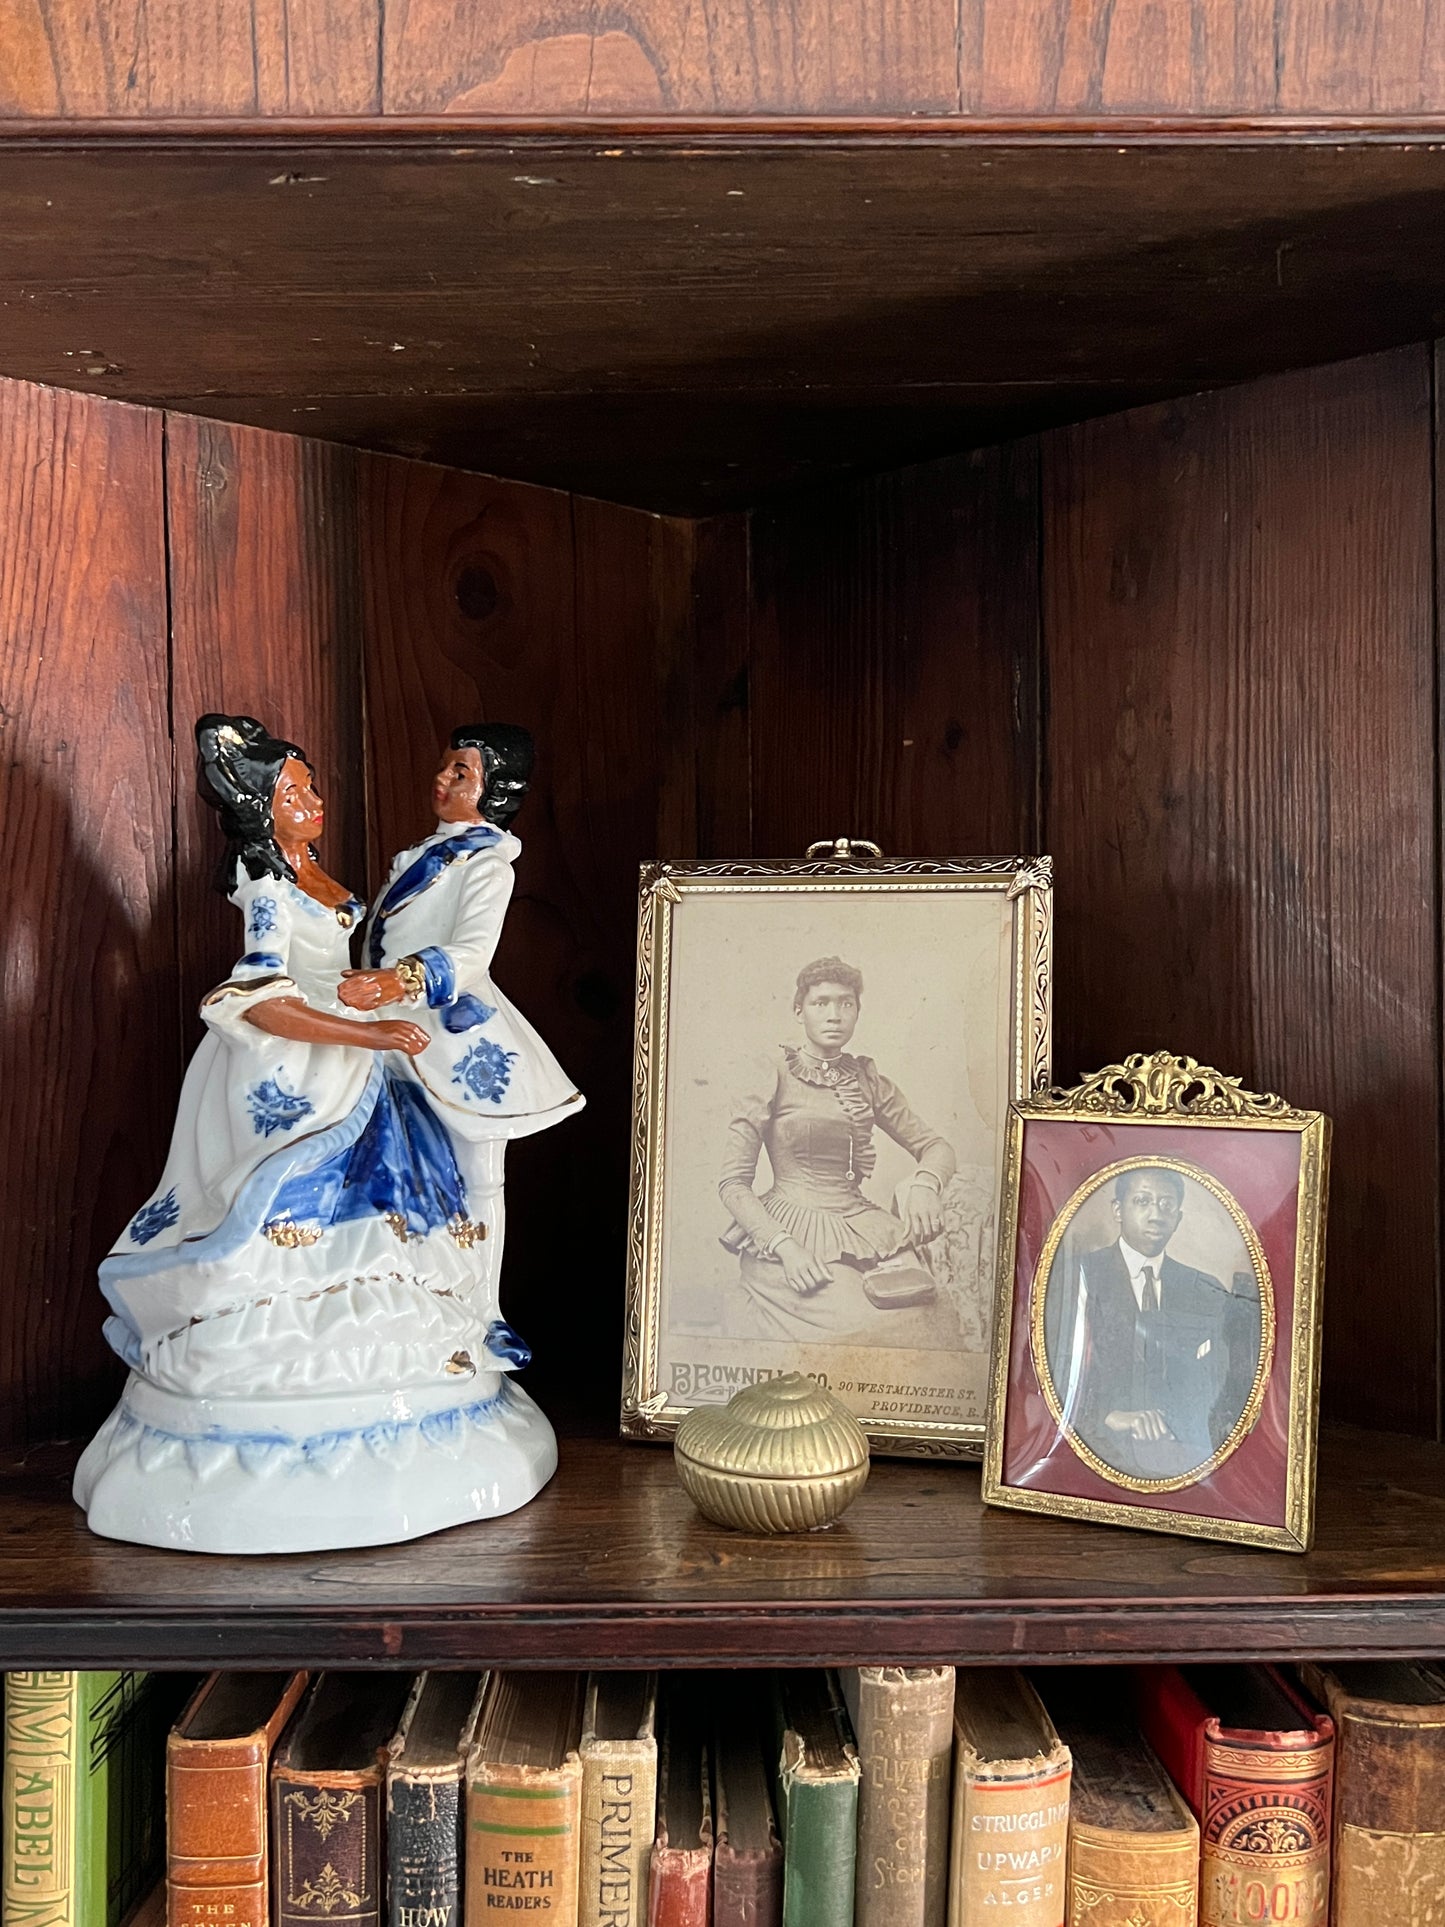 Victorian Revival Style Porcelain Statue of Black Couple - Hollywood Regency